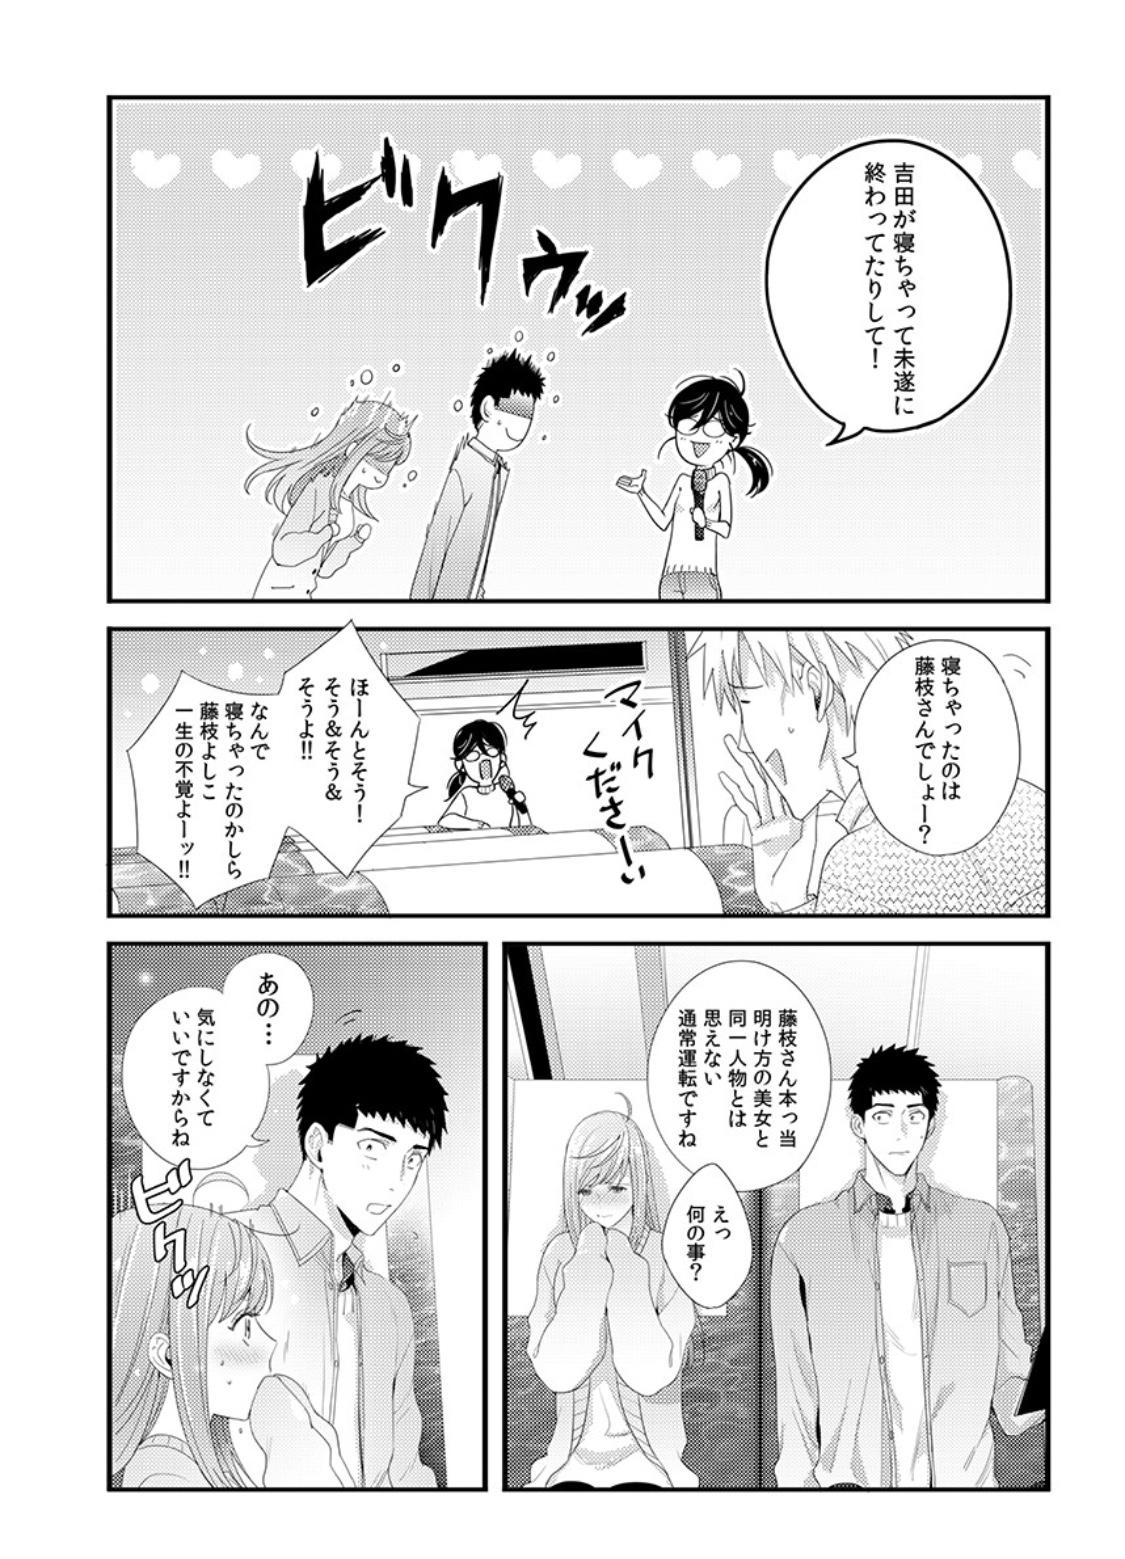 Please Let Me Hold You Futaba-San! Ch. 1-4 33